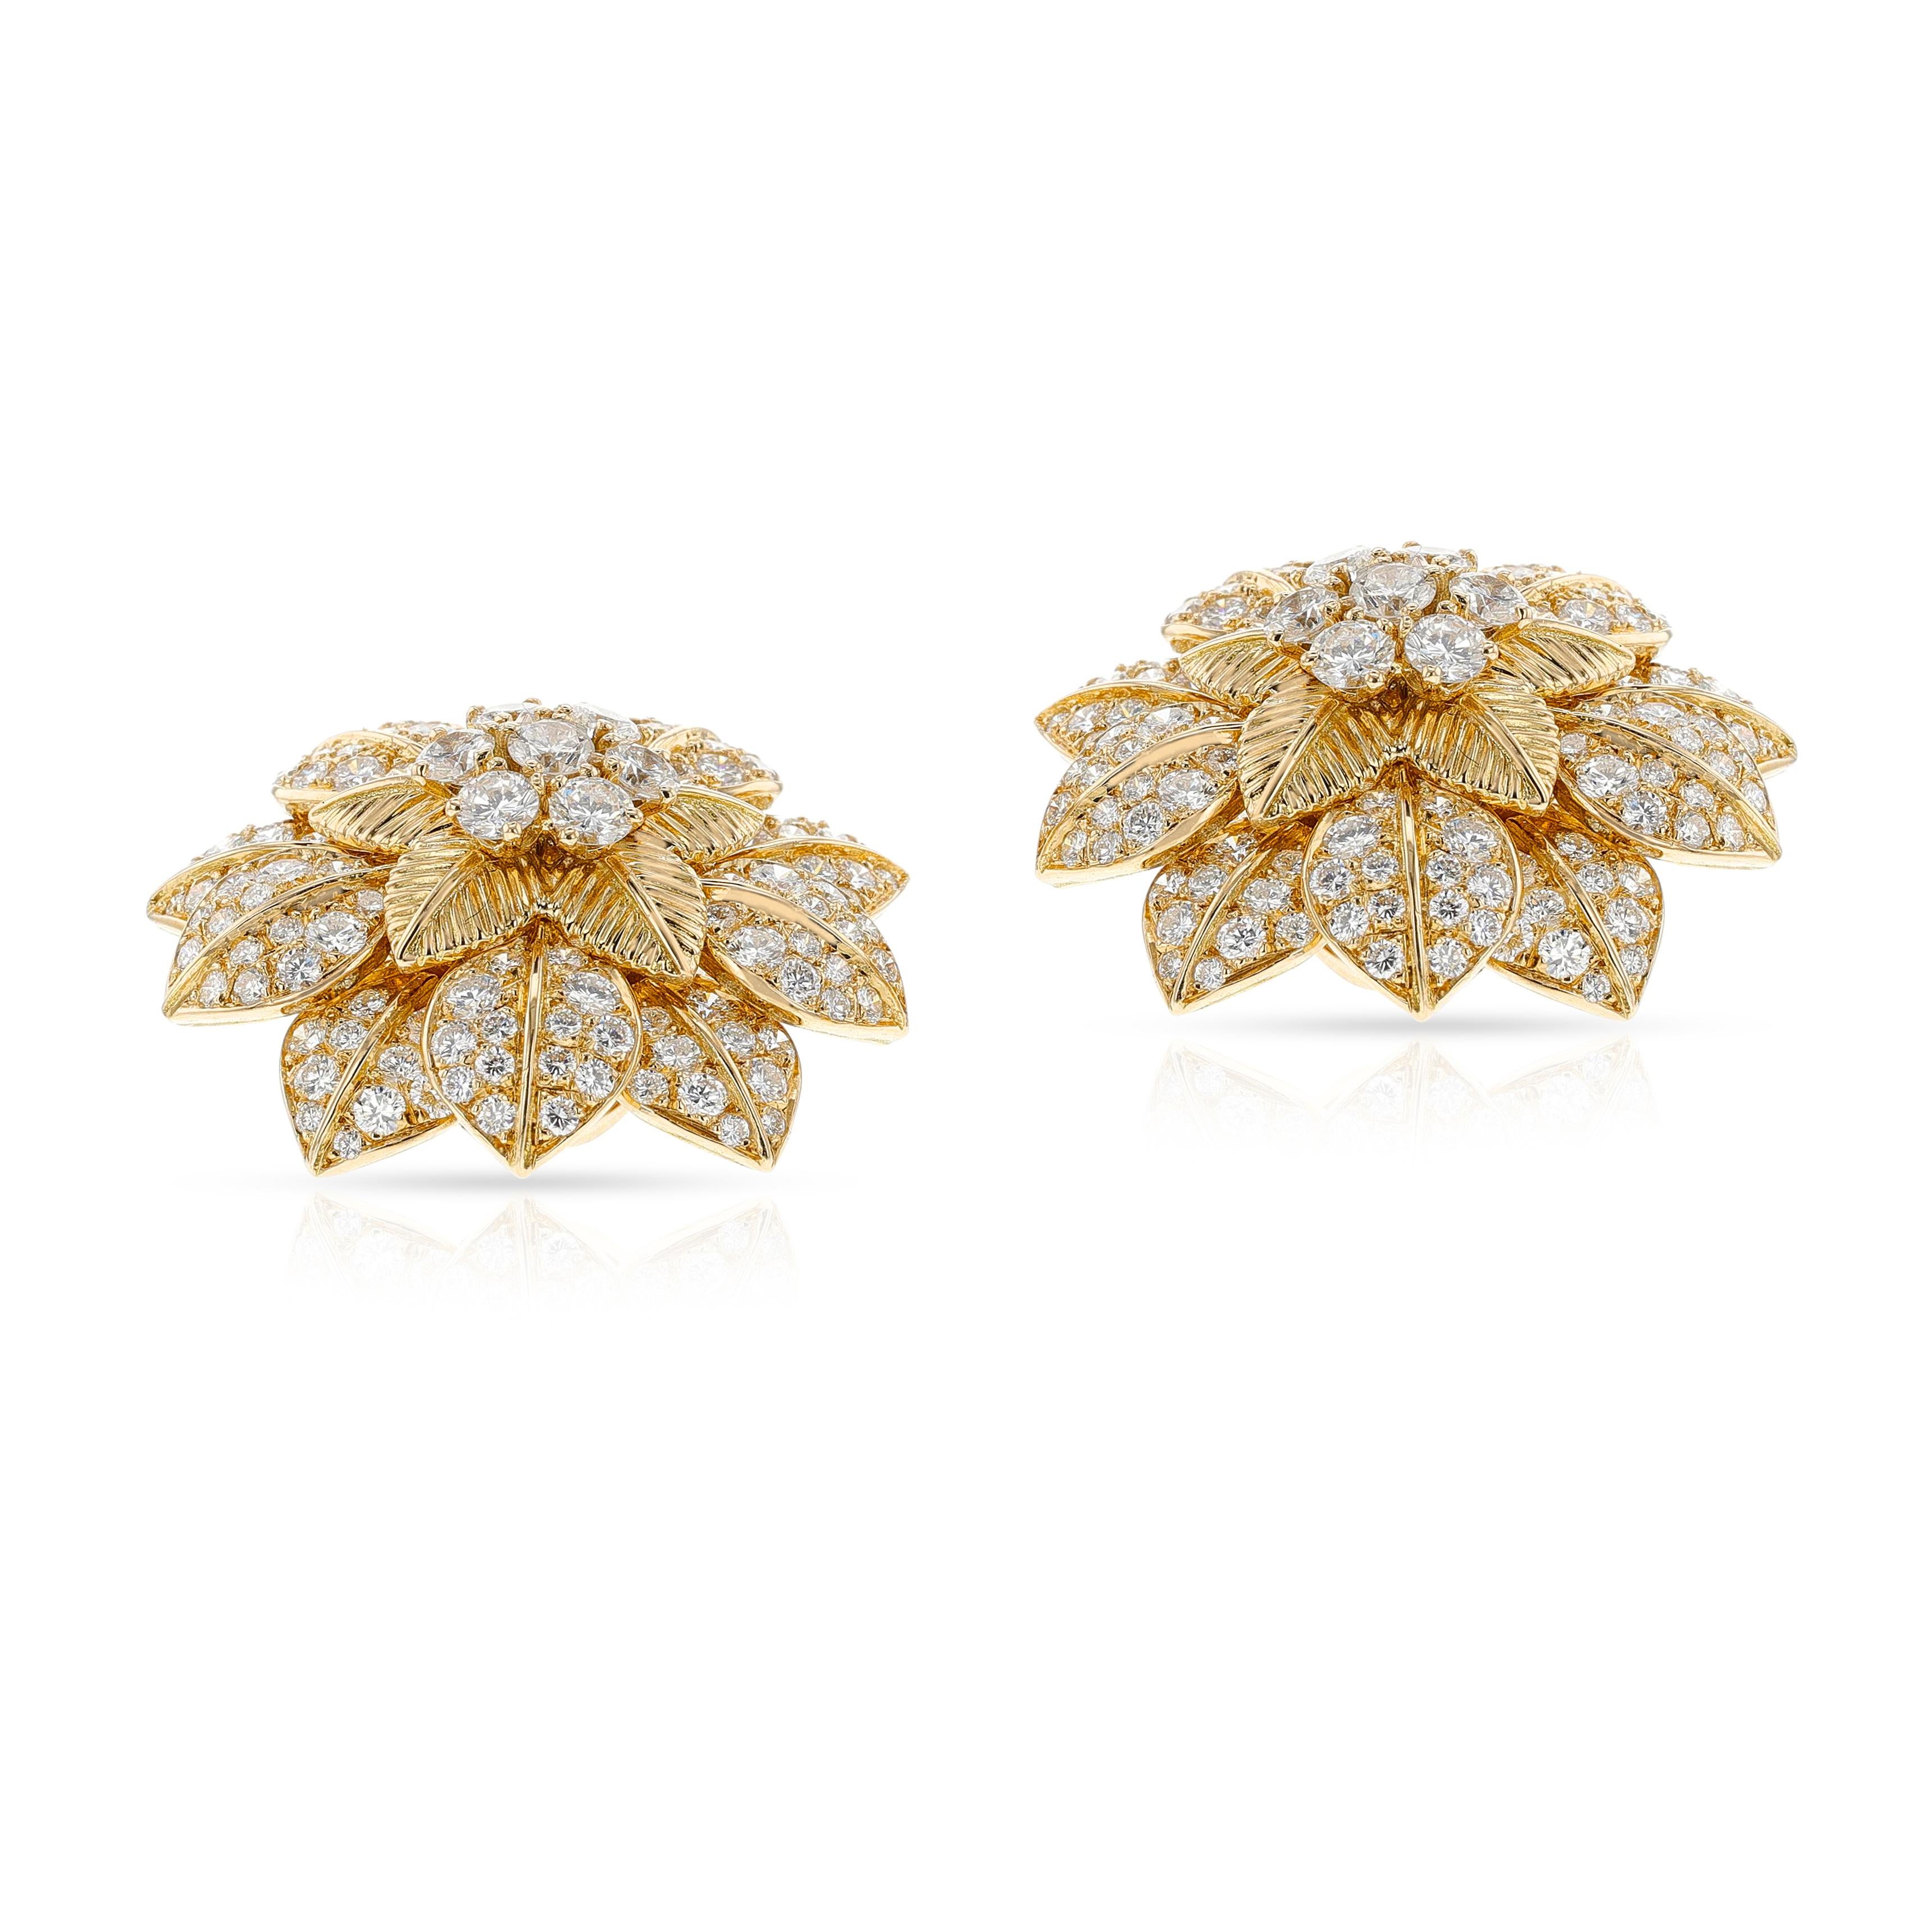 1960s Van Cleef & Arpels French Flower Diamond Petal Earrings. Signed and numbered M39112. Diamond weight appx. 10.50 cts. 1.25 inches. Total Weight: 
32.80 grams.

SERVICE PAPER FROM NY BOUTIQUE DTD. OCTOBER 20, 2023